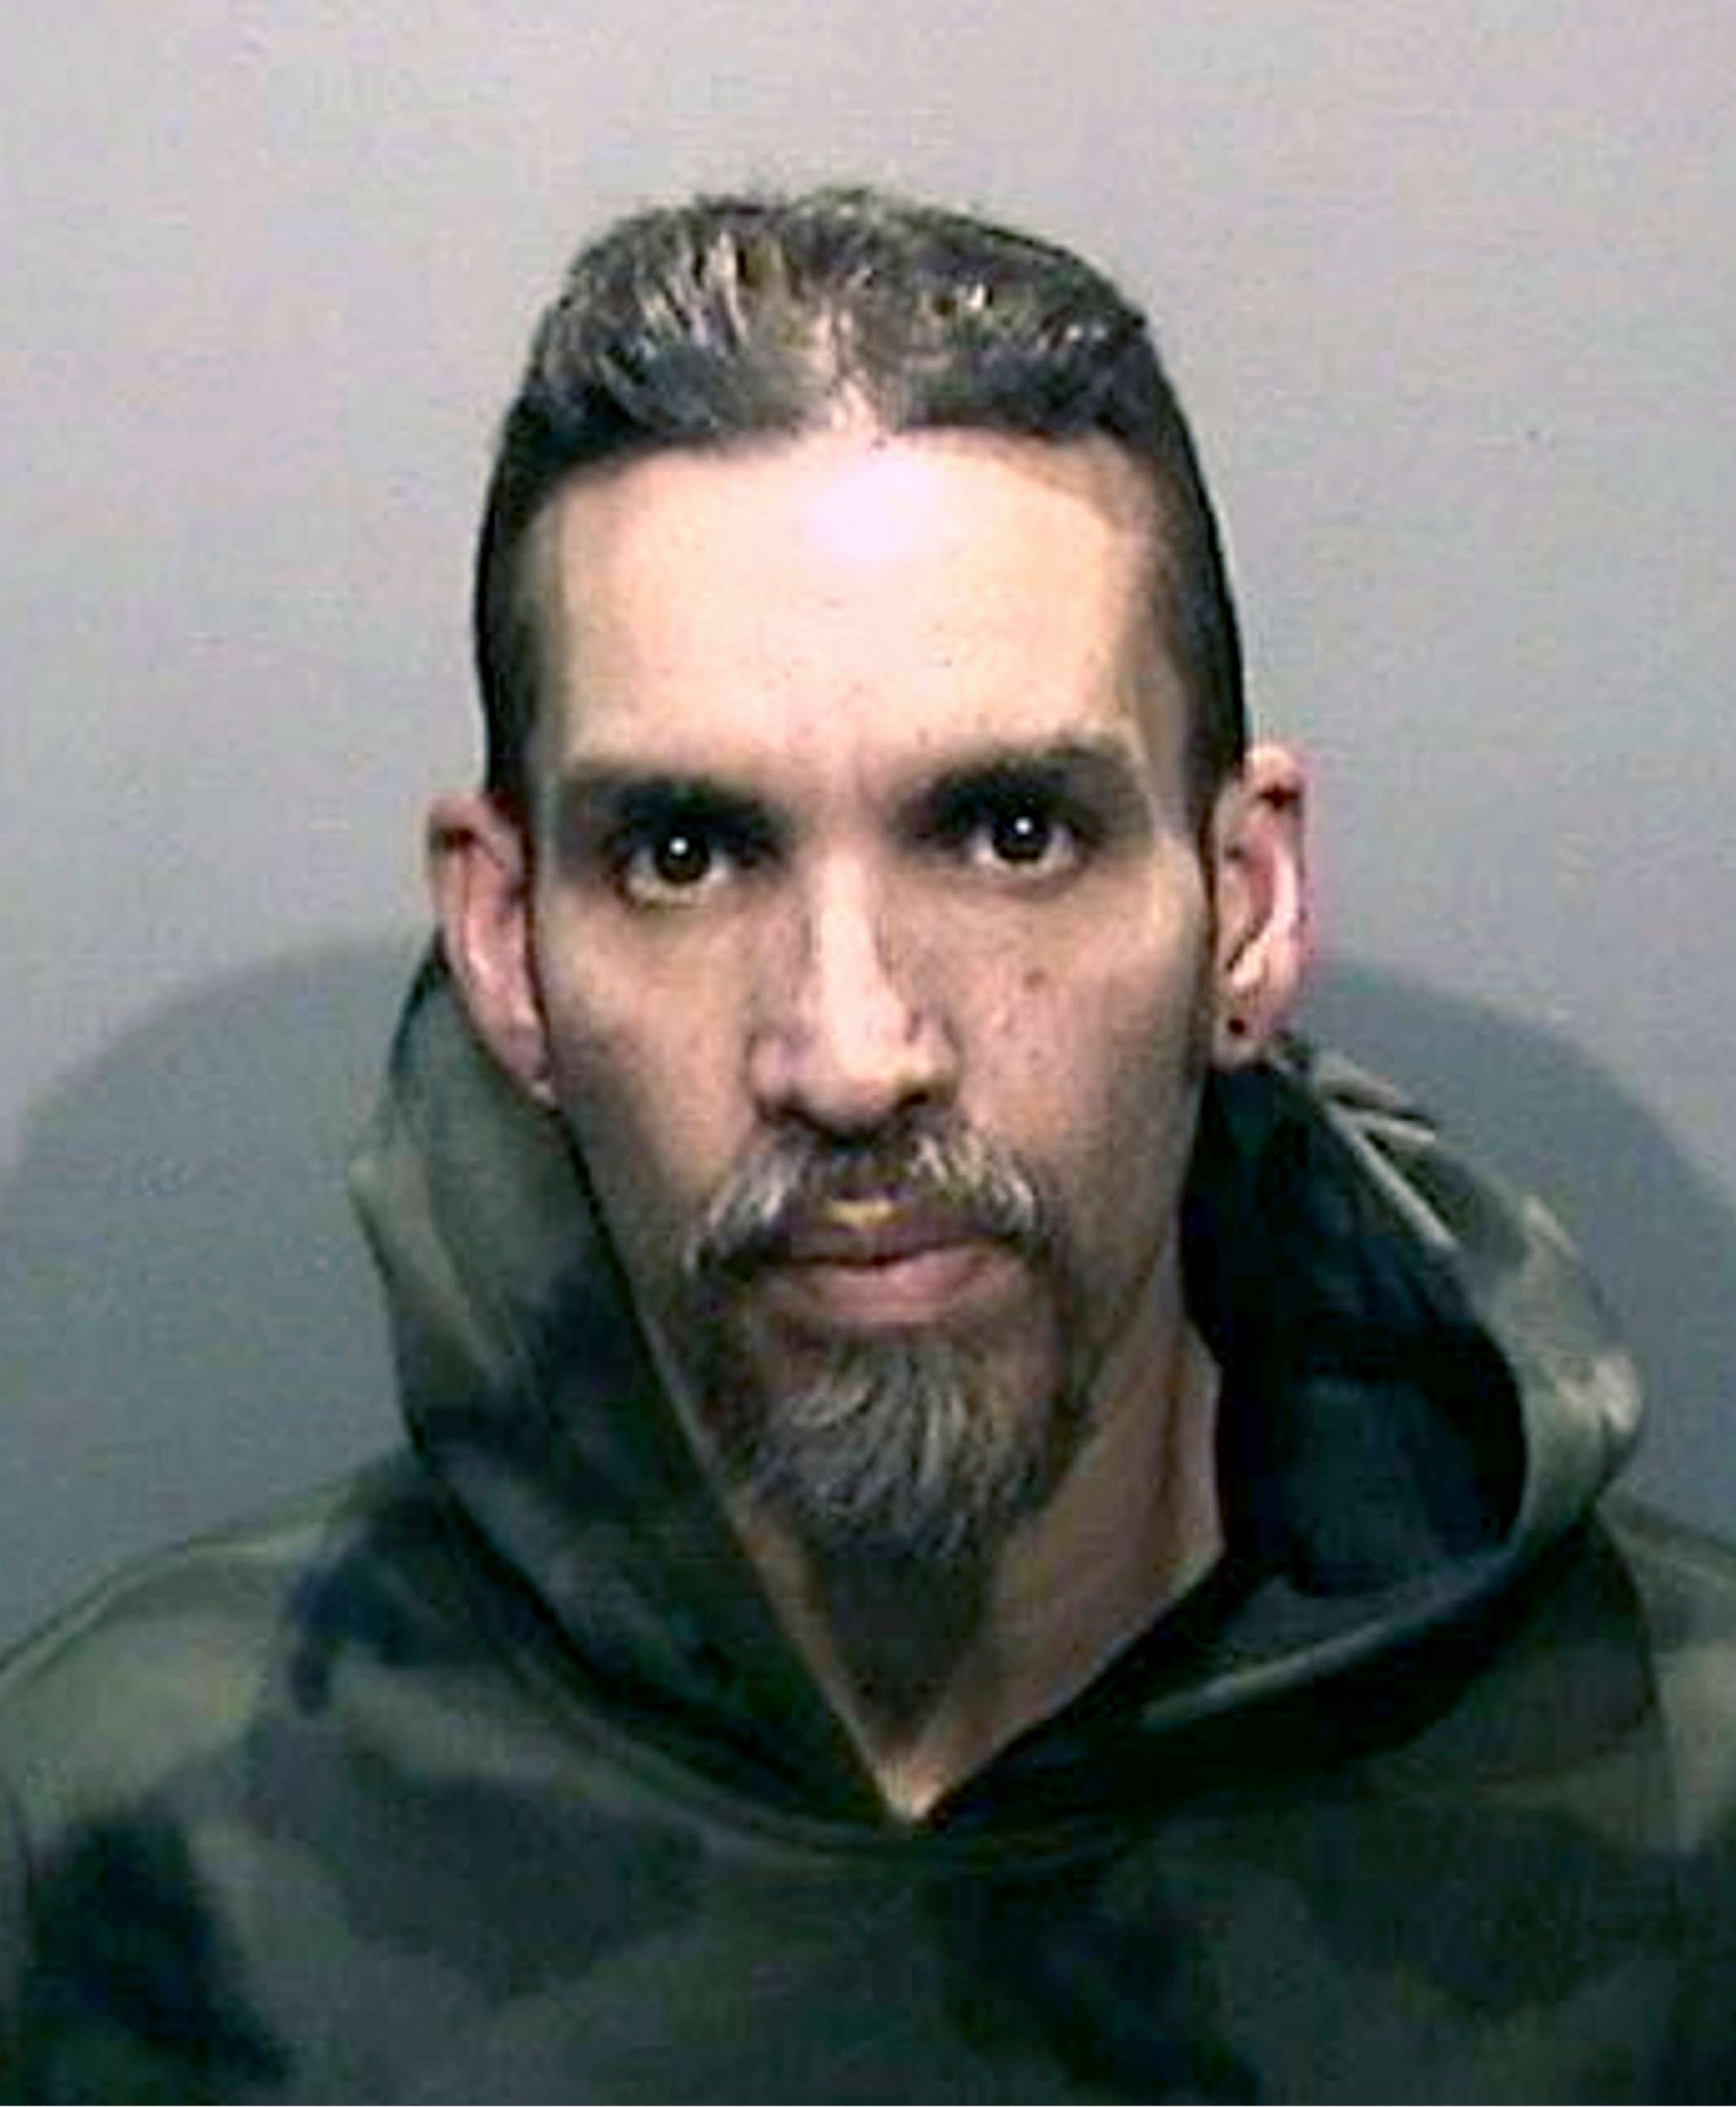 PHOTO: In this June 5, 2017, file photo, released by the Alameda County Sheriff's Office shows Derick Almena at Santa Rita Jail in Alameda County, Calif.